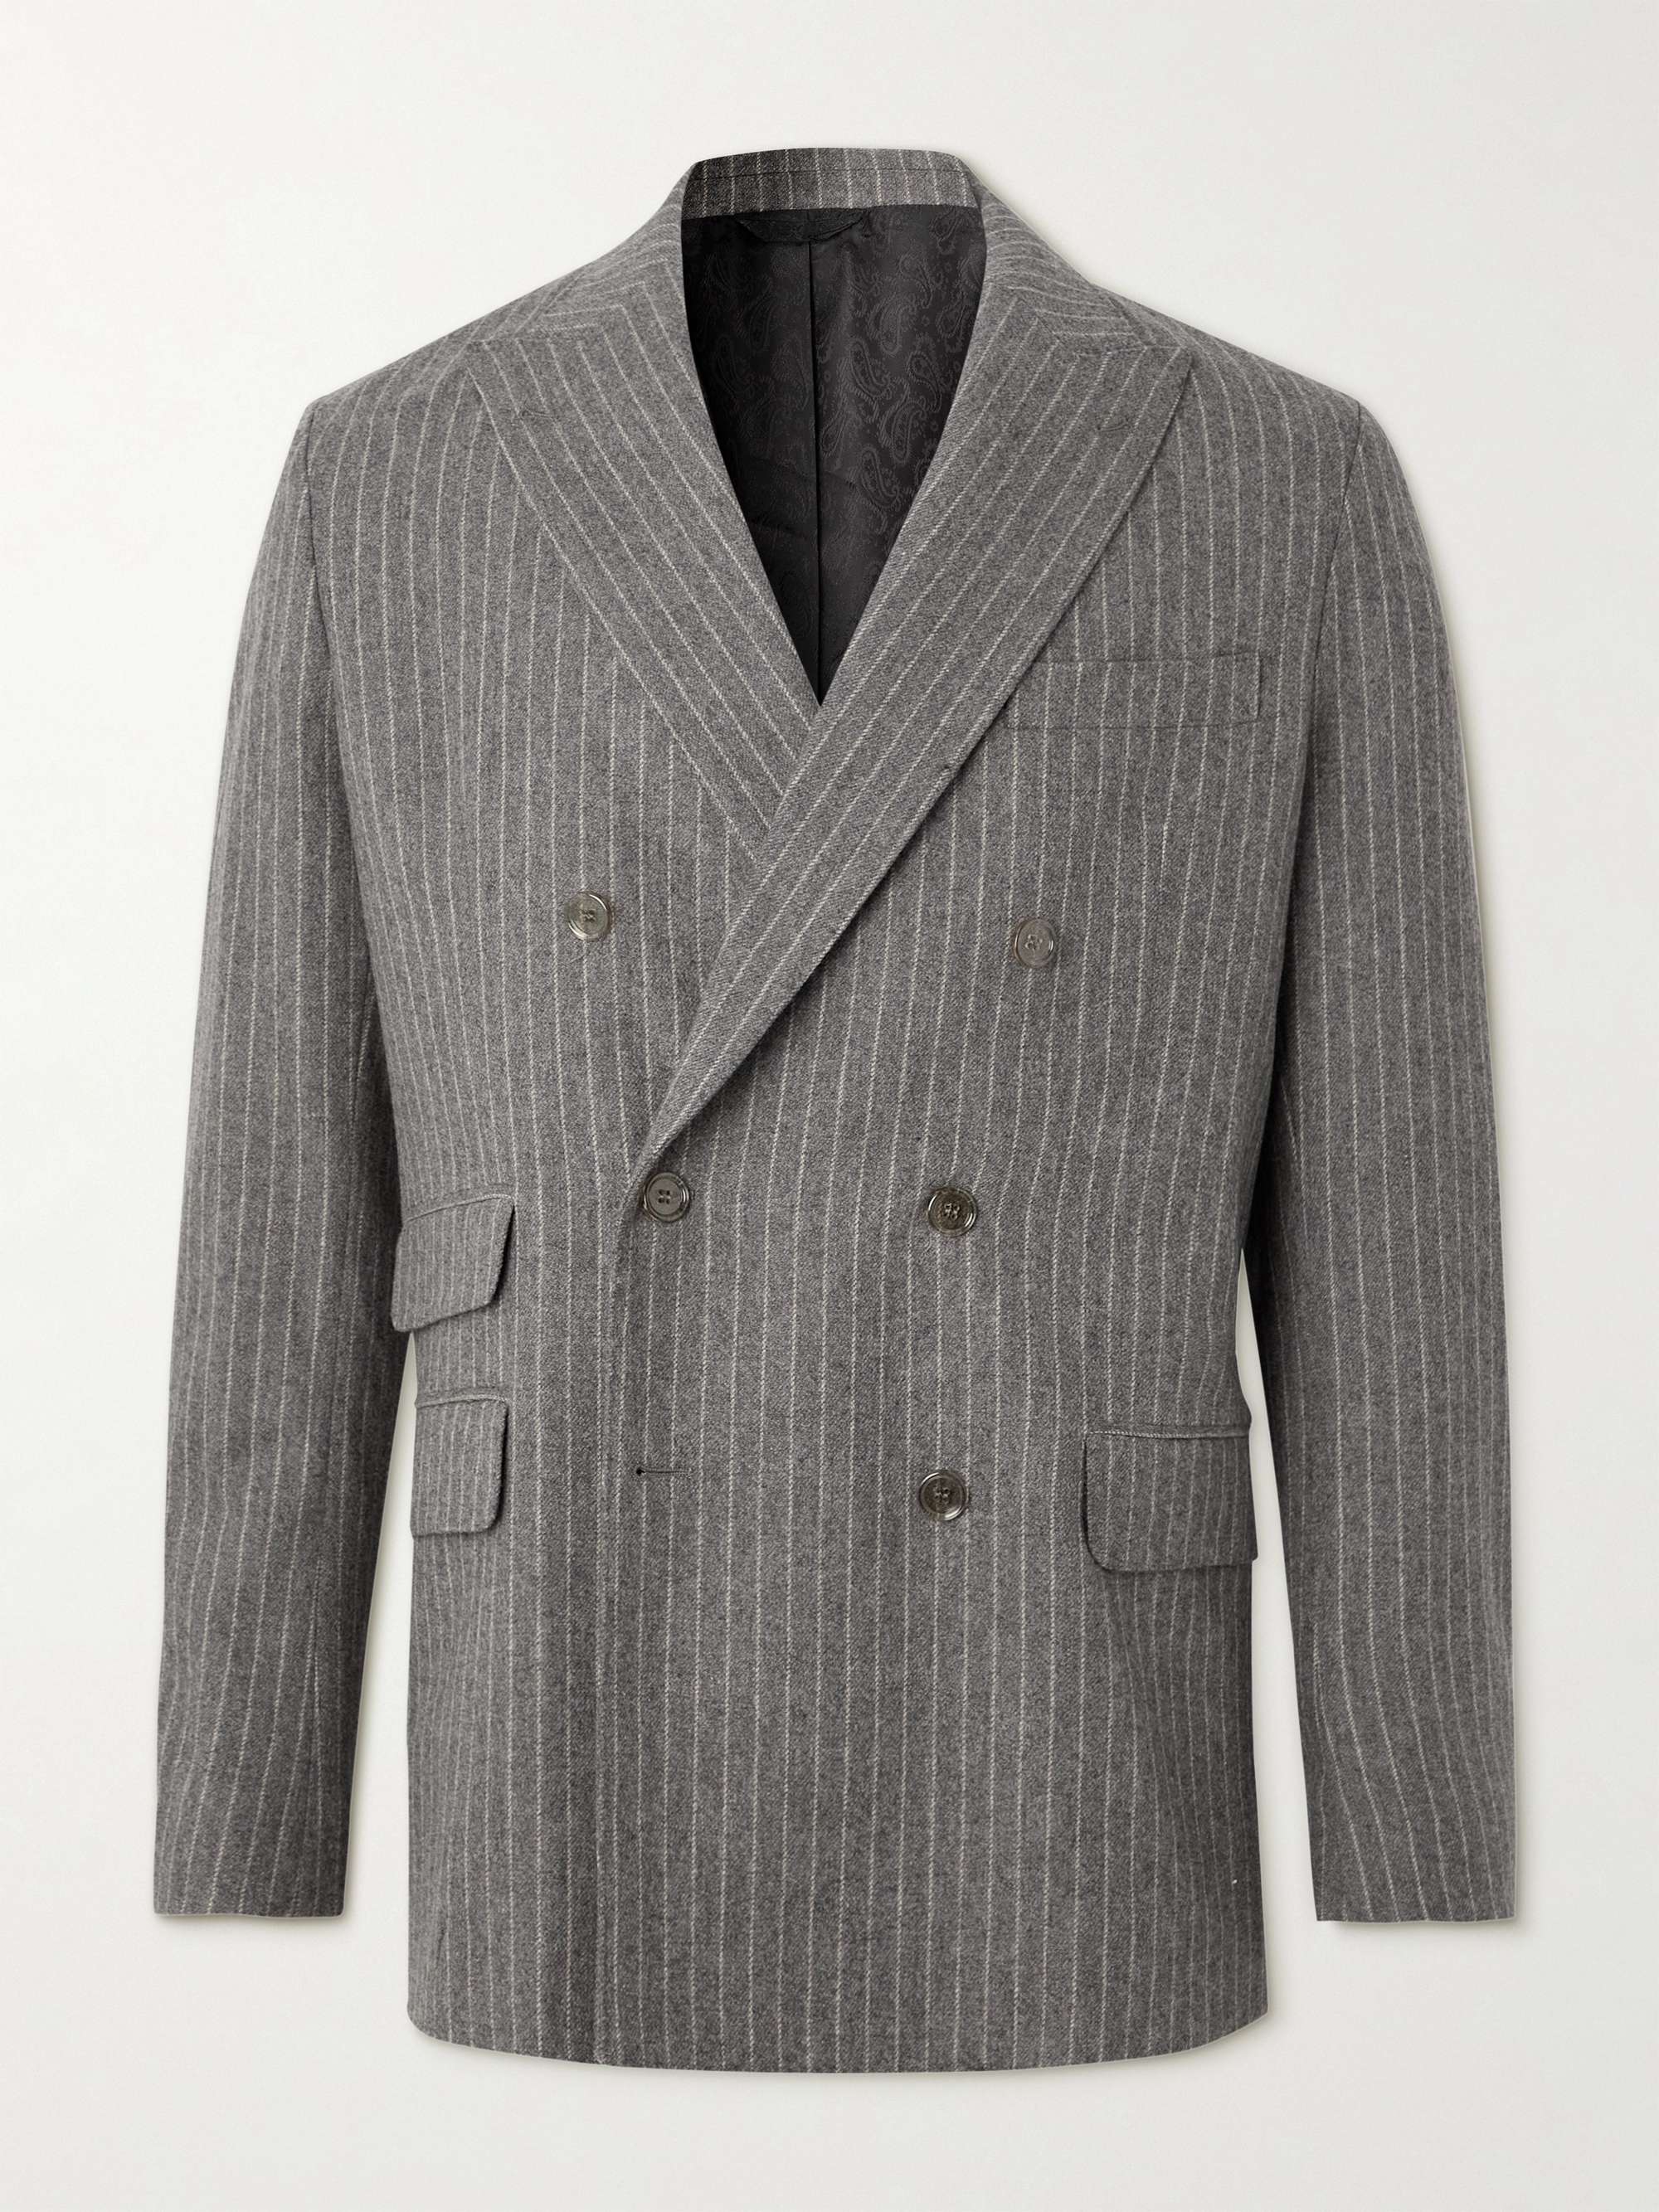 ACNE STUDIOS Oversized Double-Breasted Pinstriped Wool-Blend Suit Jacket